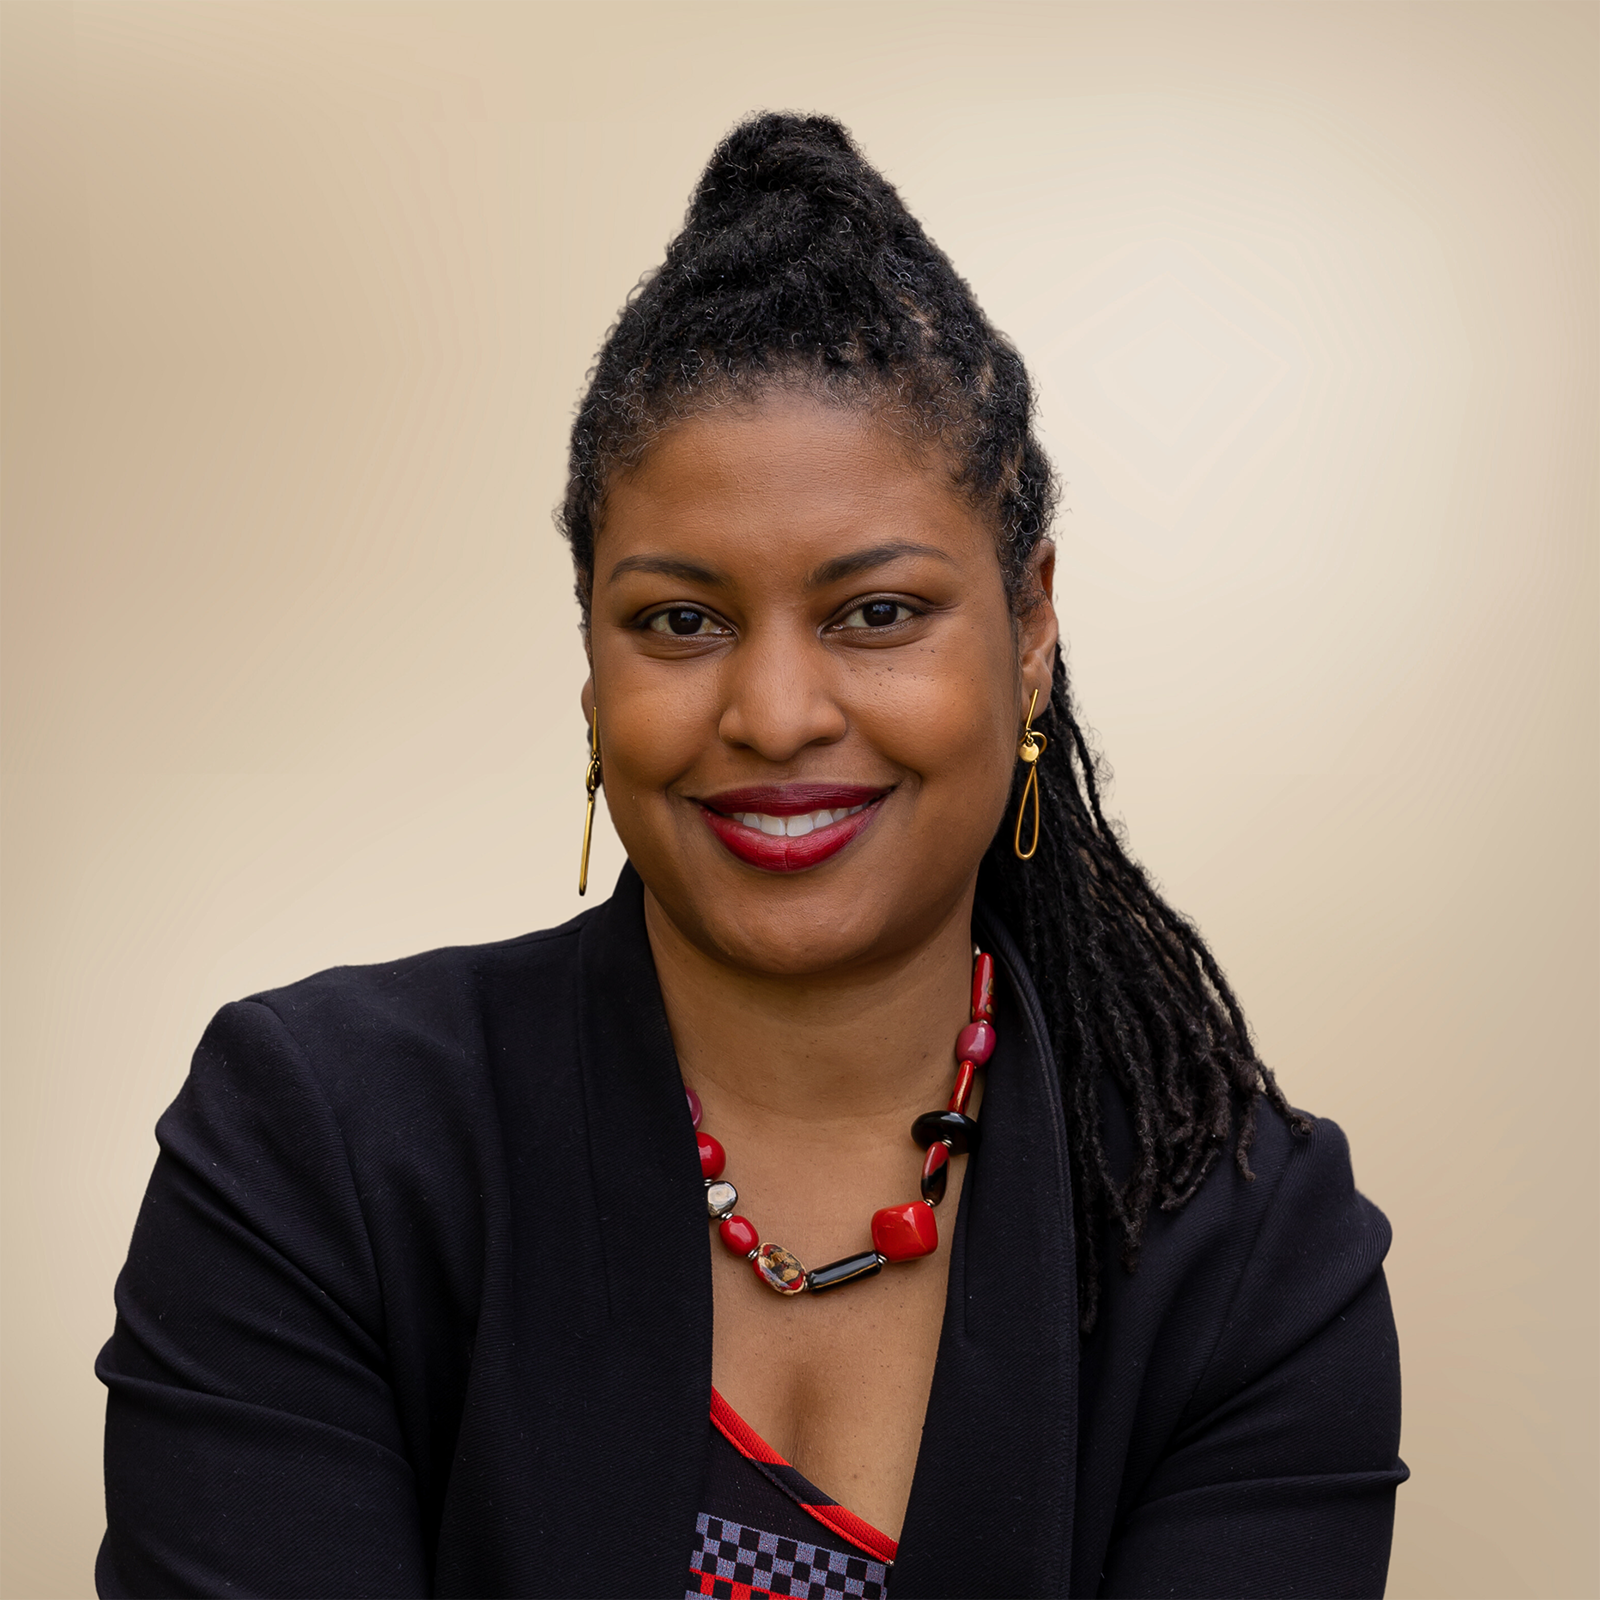 Portrait shot of Aisha Francis, president and CEO of Franklin Cummings Tech in Boston, wearing a black suit and posed against a light gold background